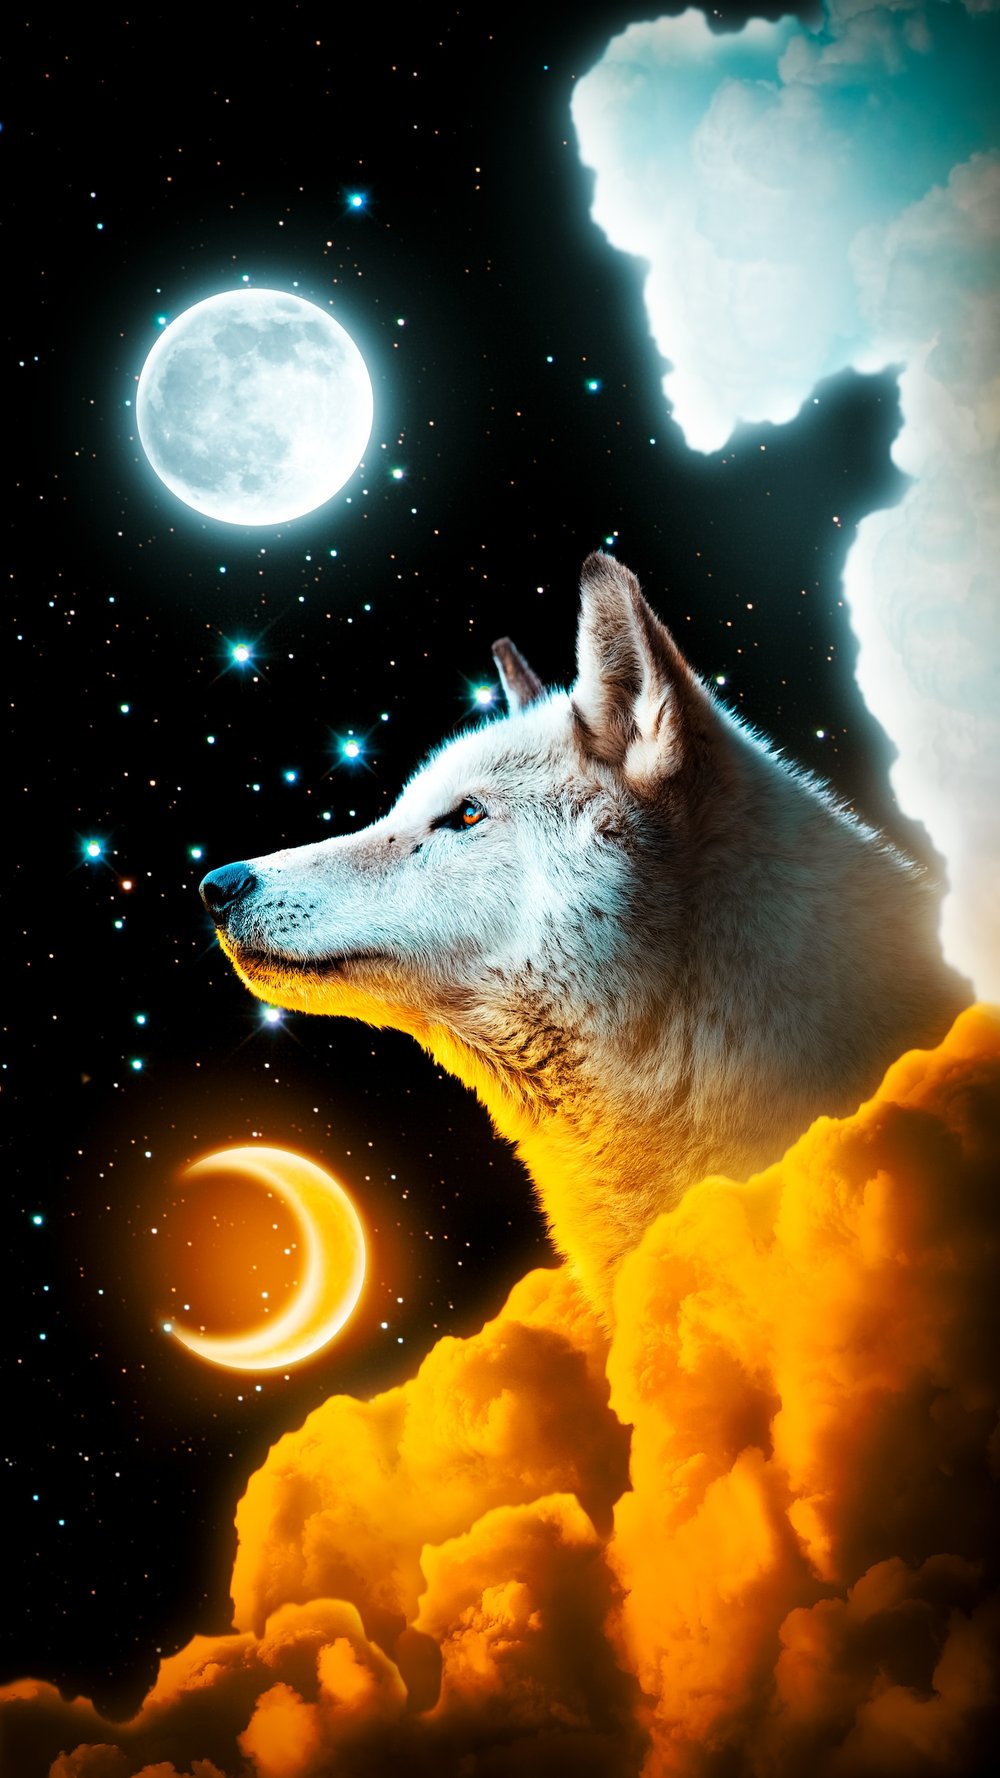 The Spiritual Meaning of the January Wolf Moon